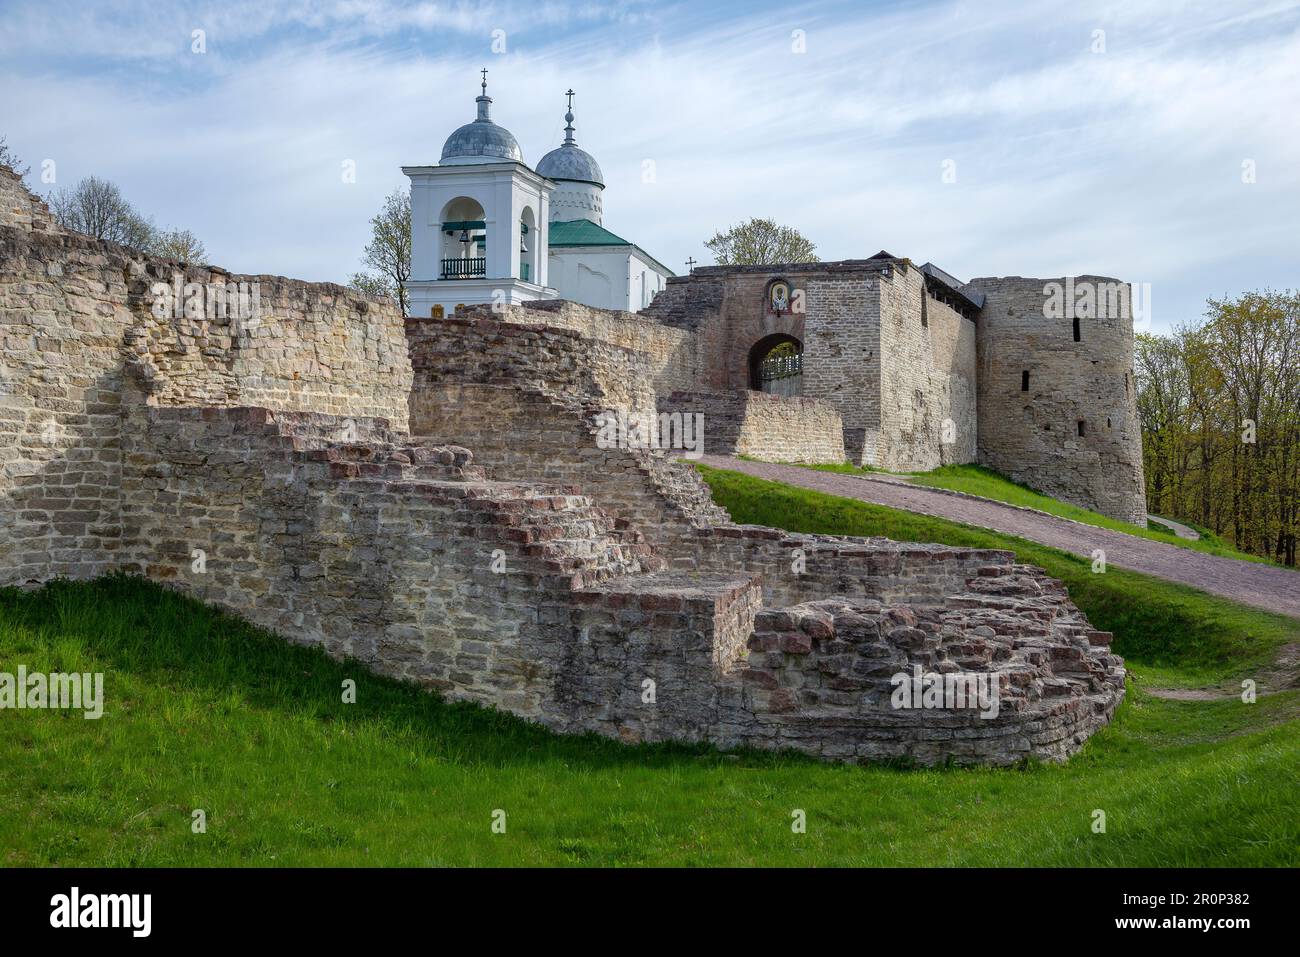 Entrance to the ancient fortress, Izborsk. Pskov region, Russia Stock Photo